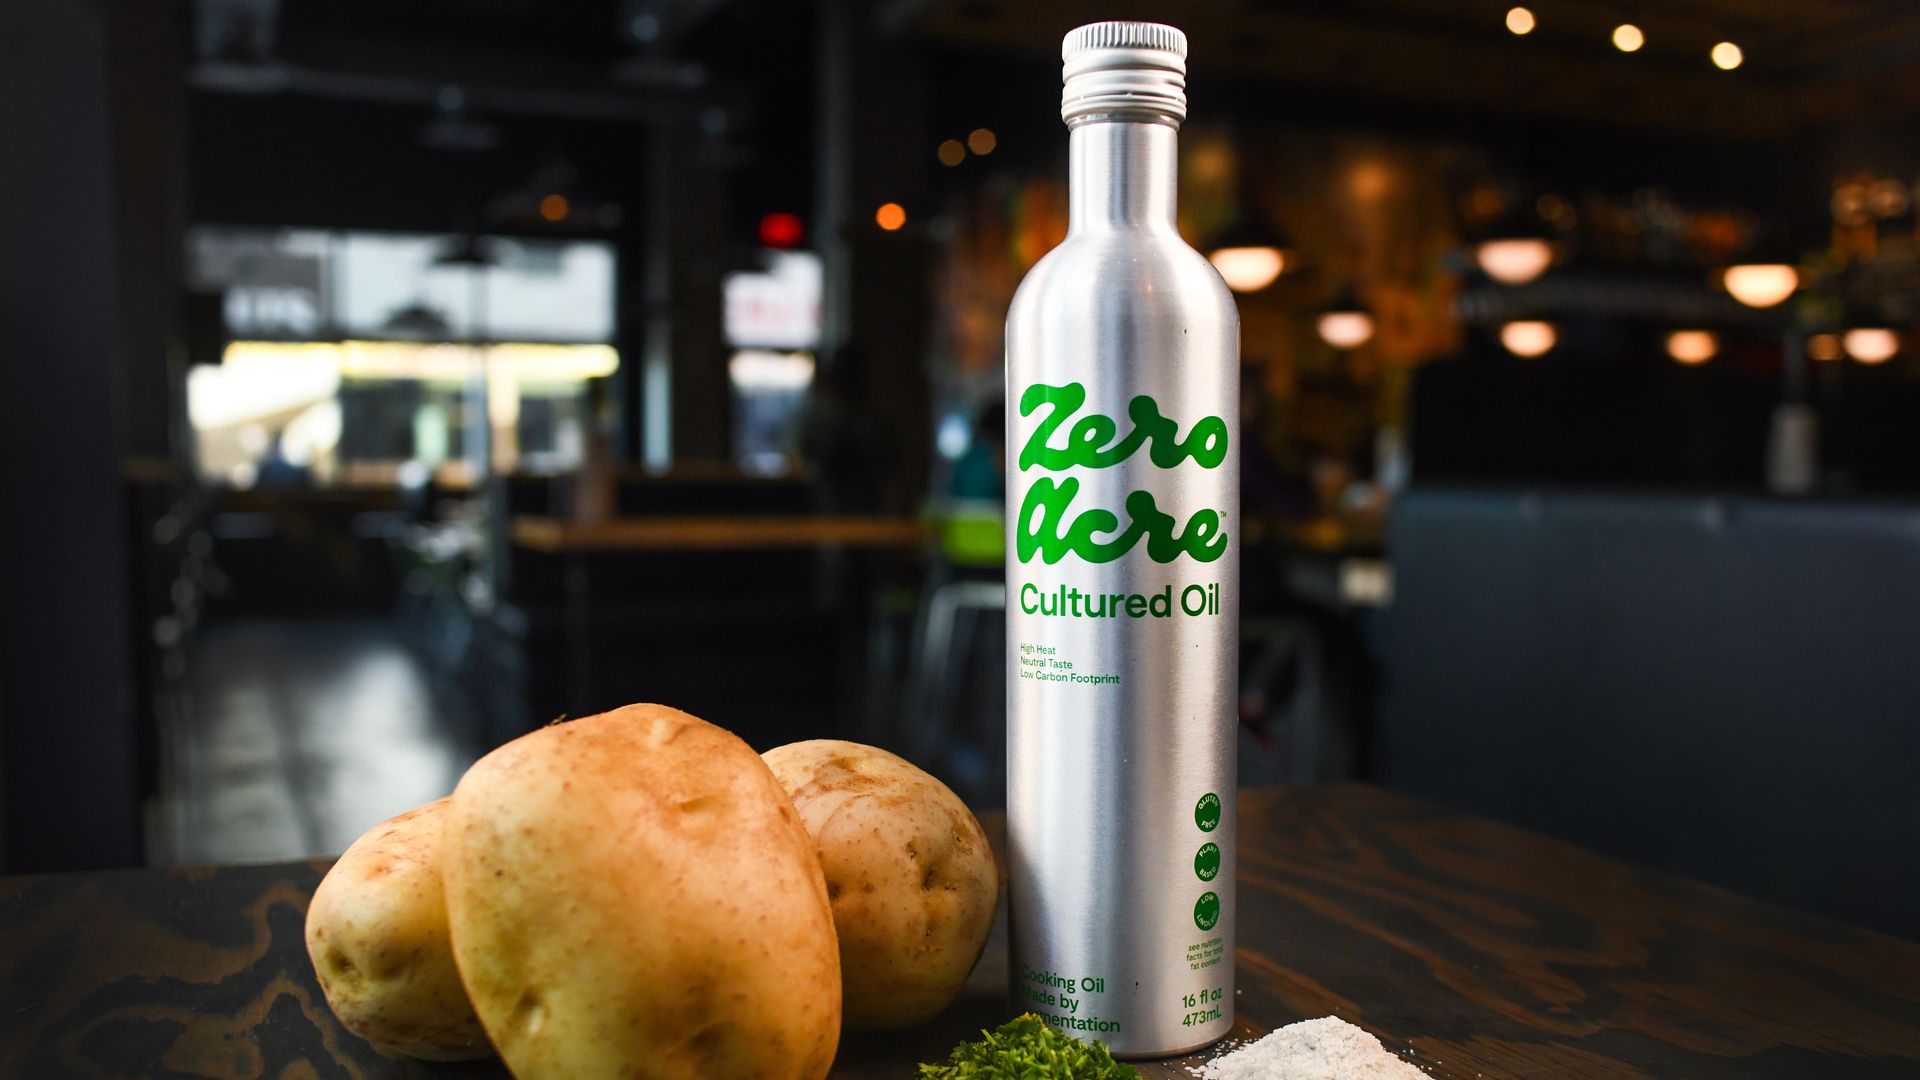 Raw potatoes and an aluminum bottle of Zero Acre Farms cooking oil are displayed on a table.